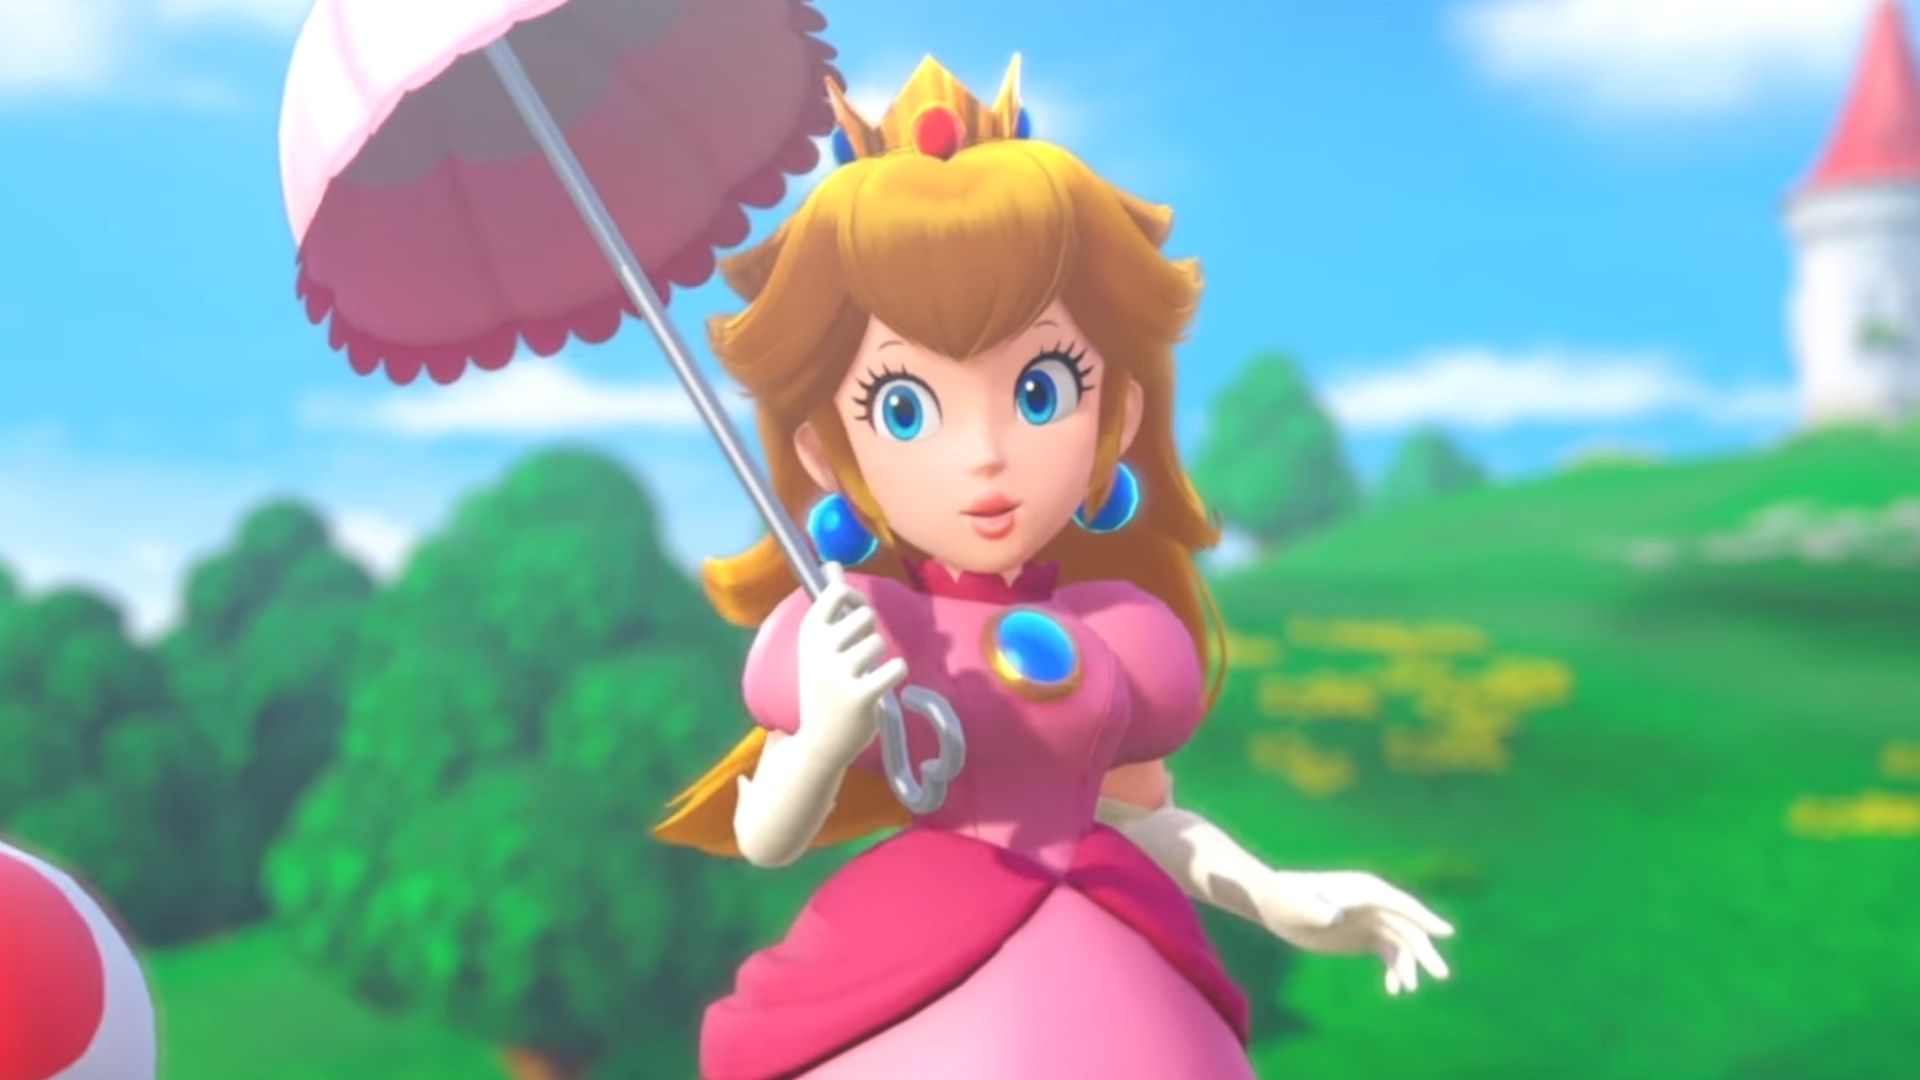 Princess Peach: Showtime! release date and trailer